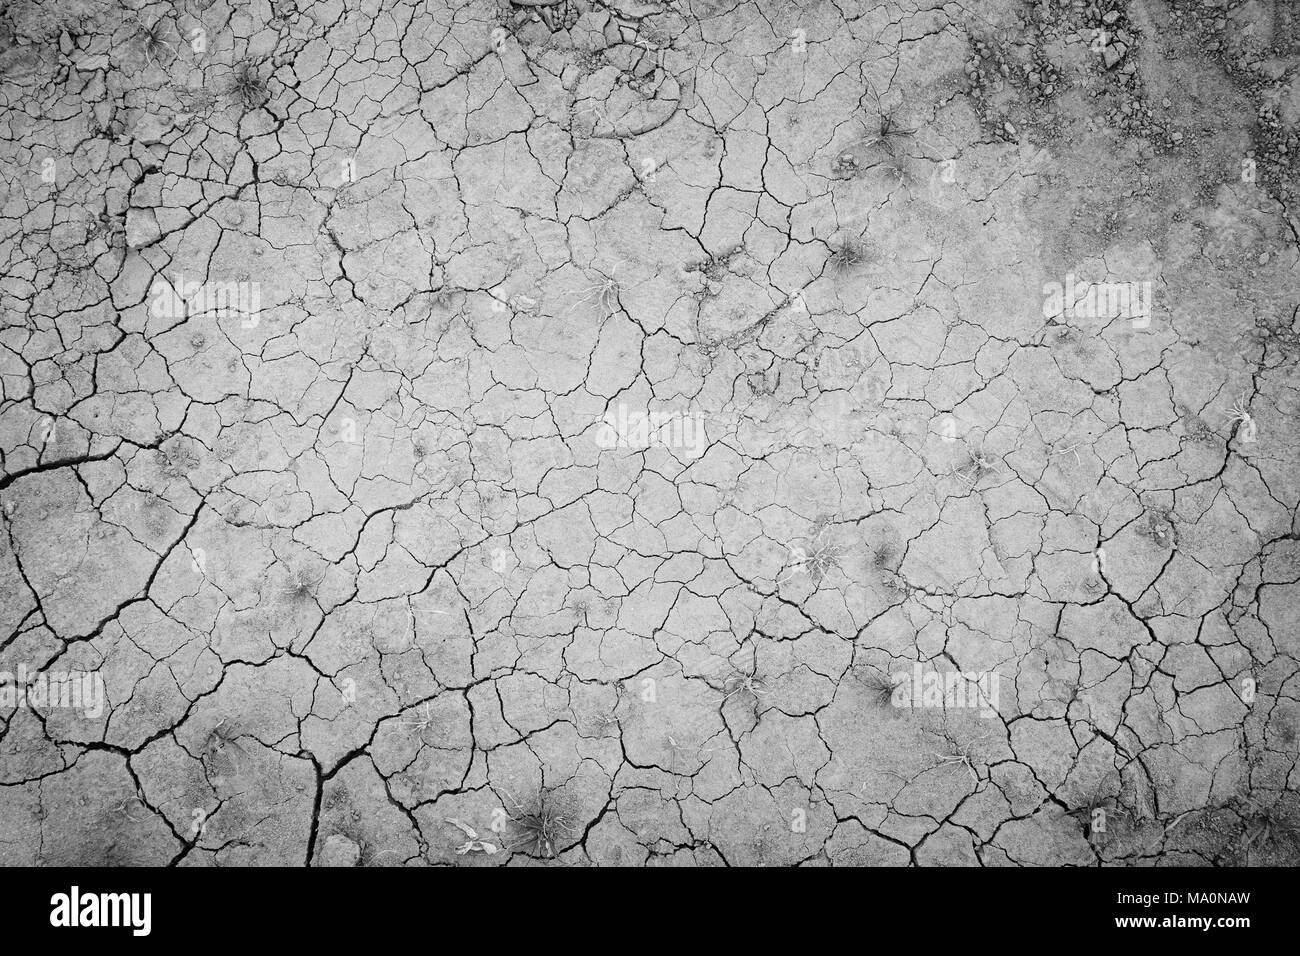 Dry and cracked soil ground during drought, viewed from above with vignette in black and white. Stock Photo